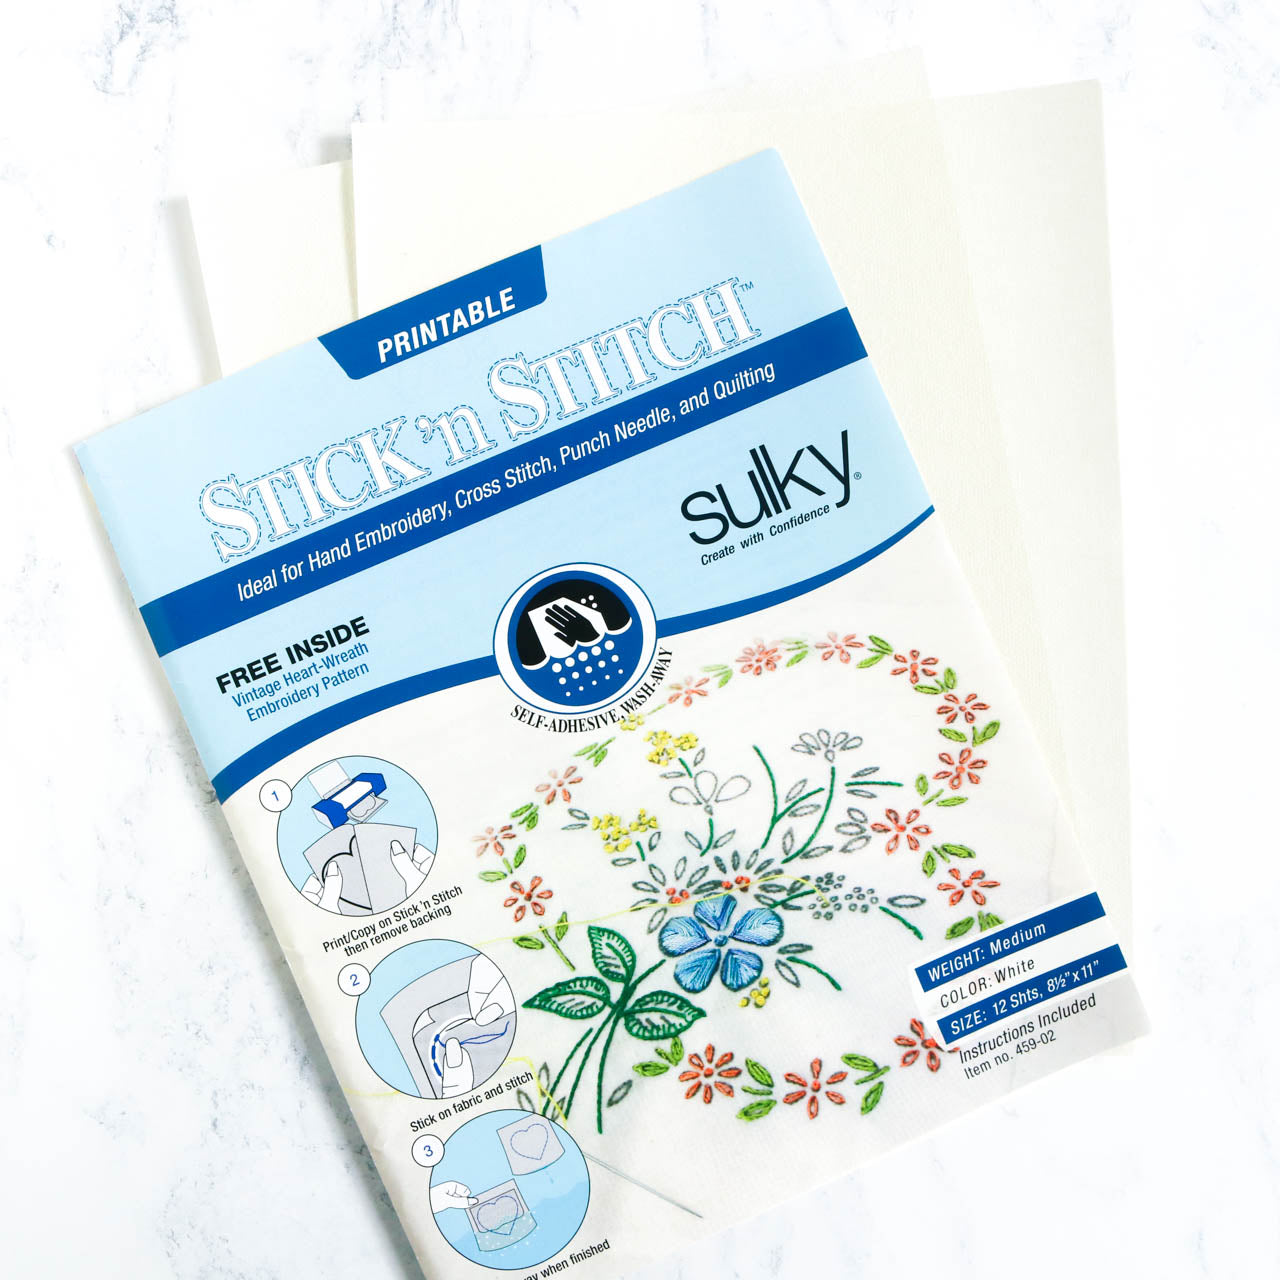  Bundle of 2 Packages of Stick N Stitch Self Adhesive